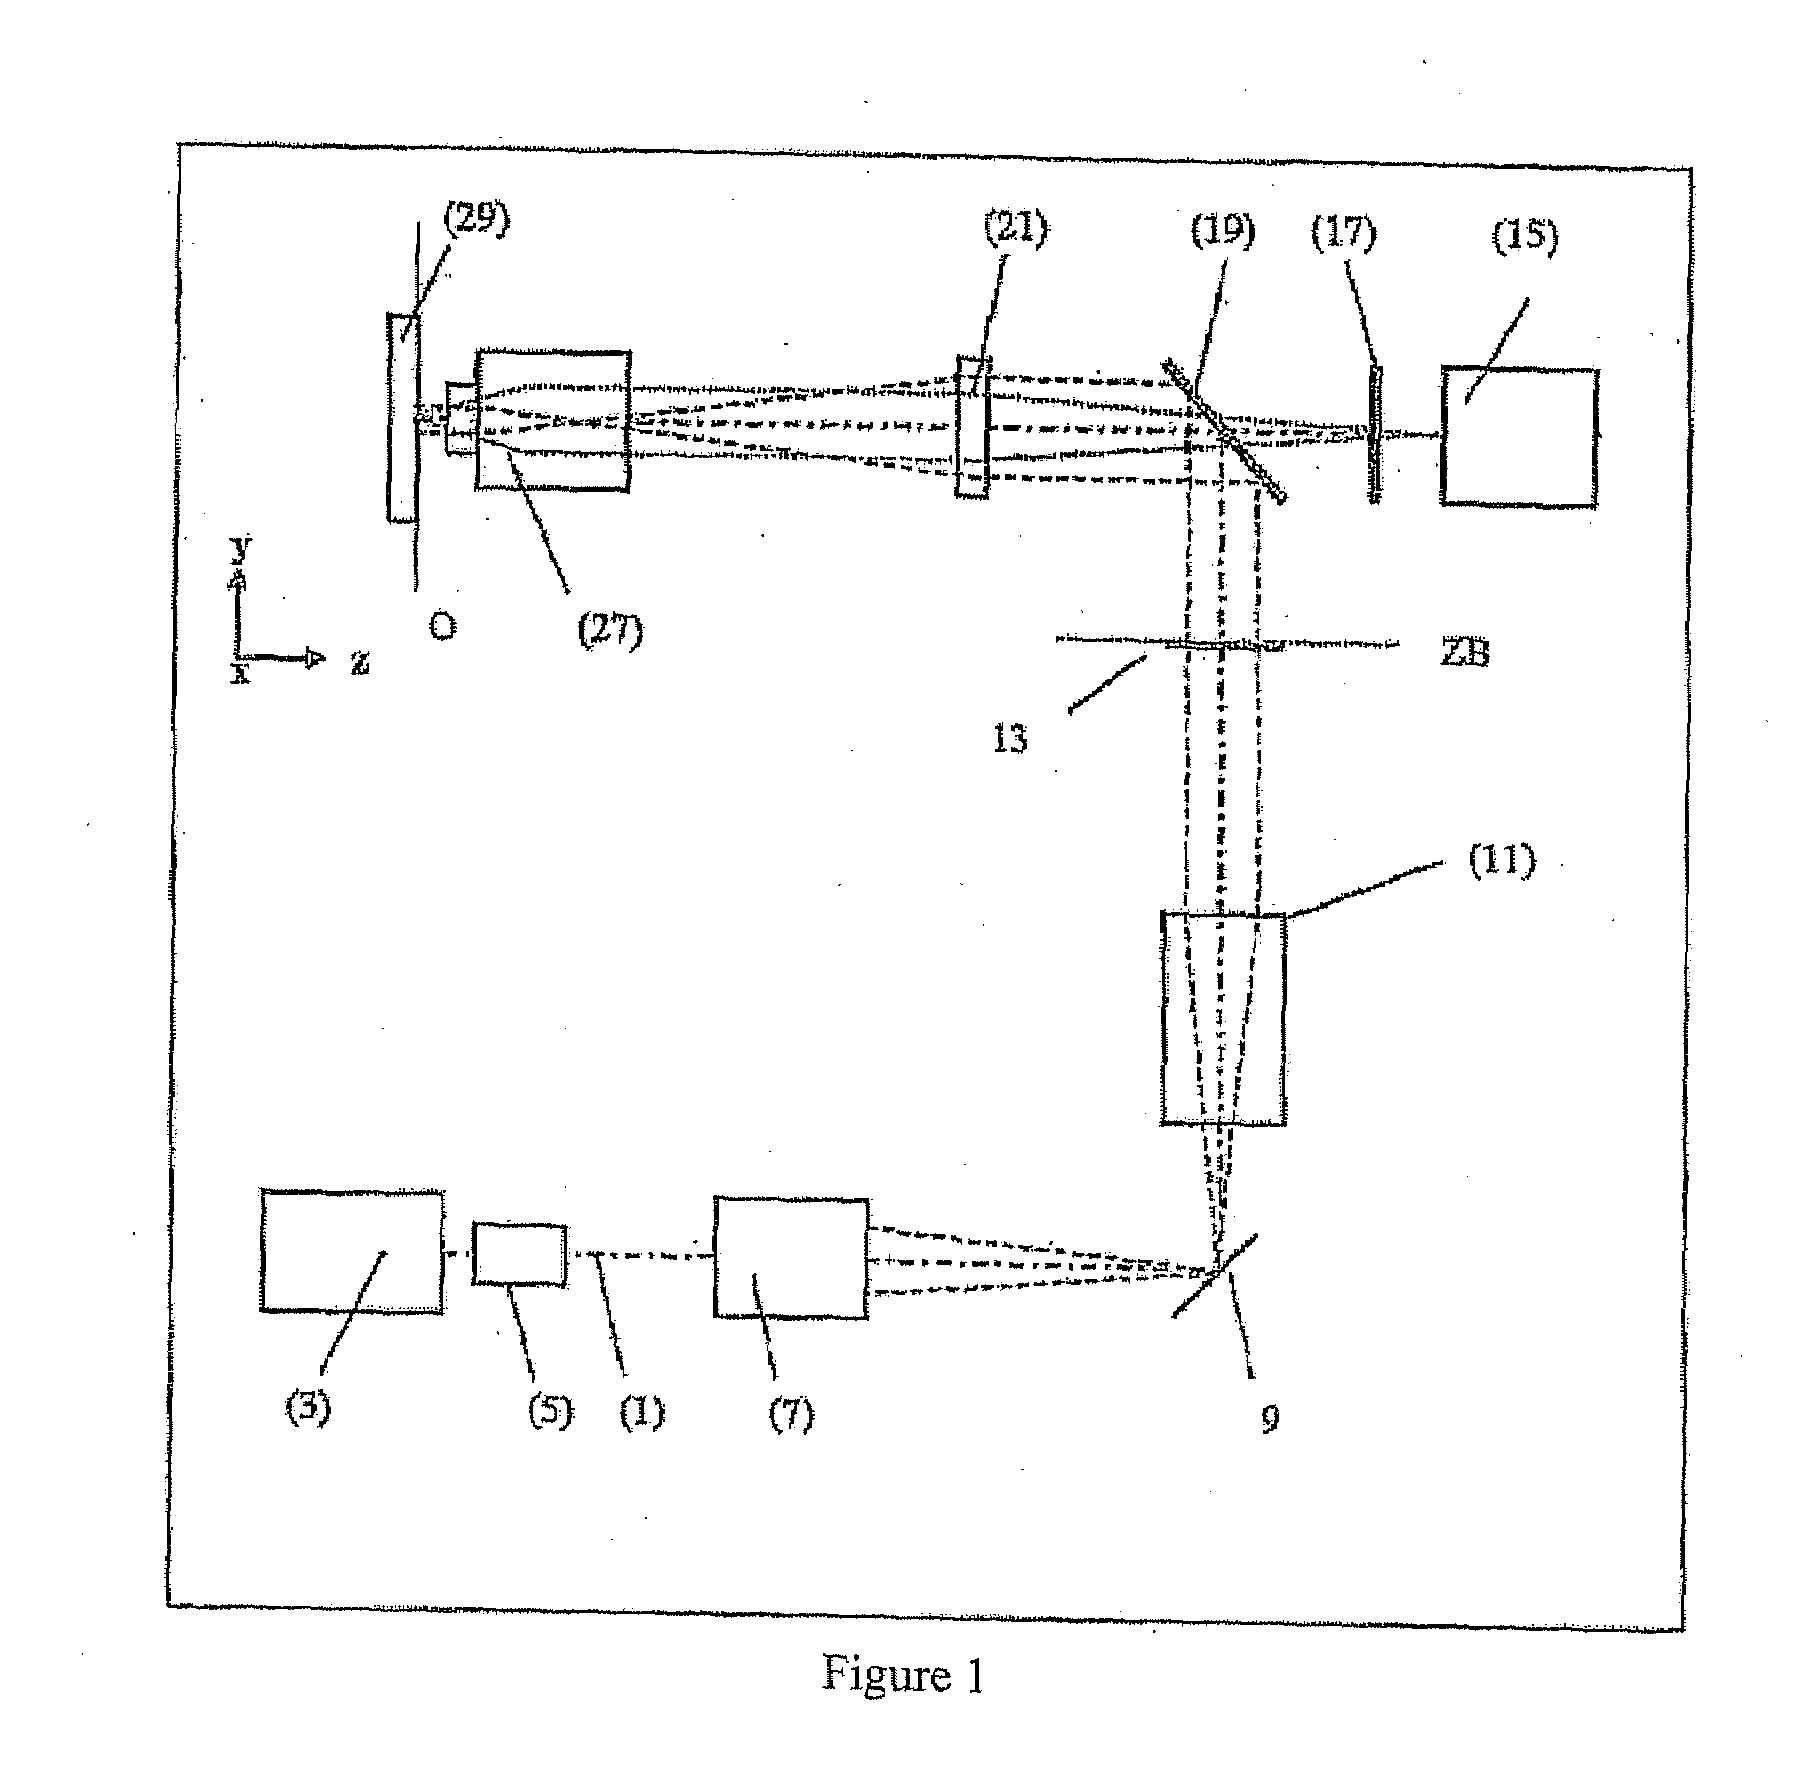 Method and Configuration for Optically Detecting an Illuminated Specimen